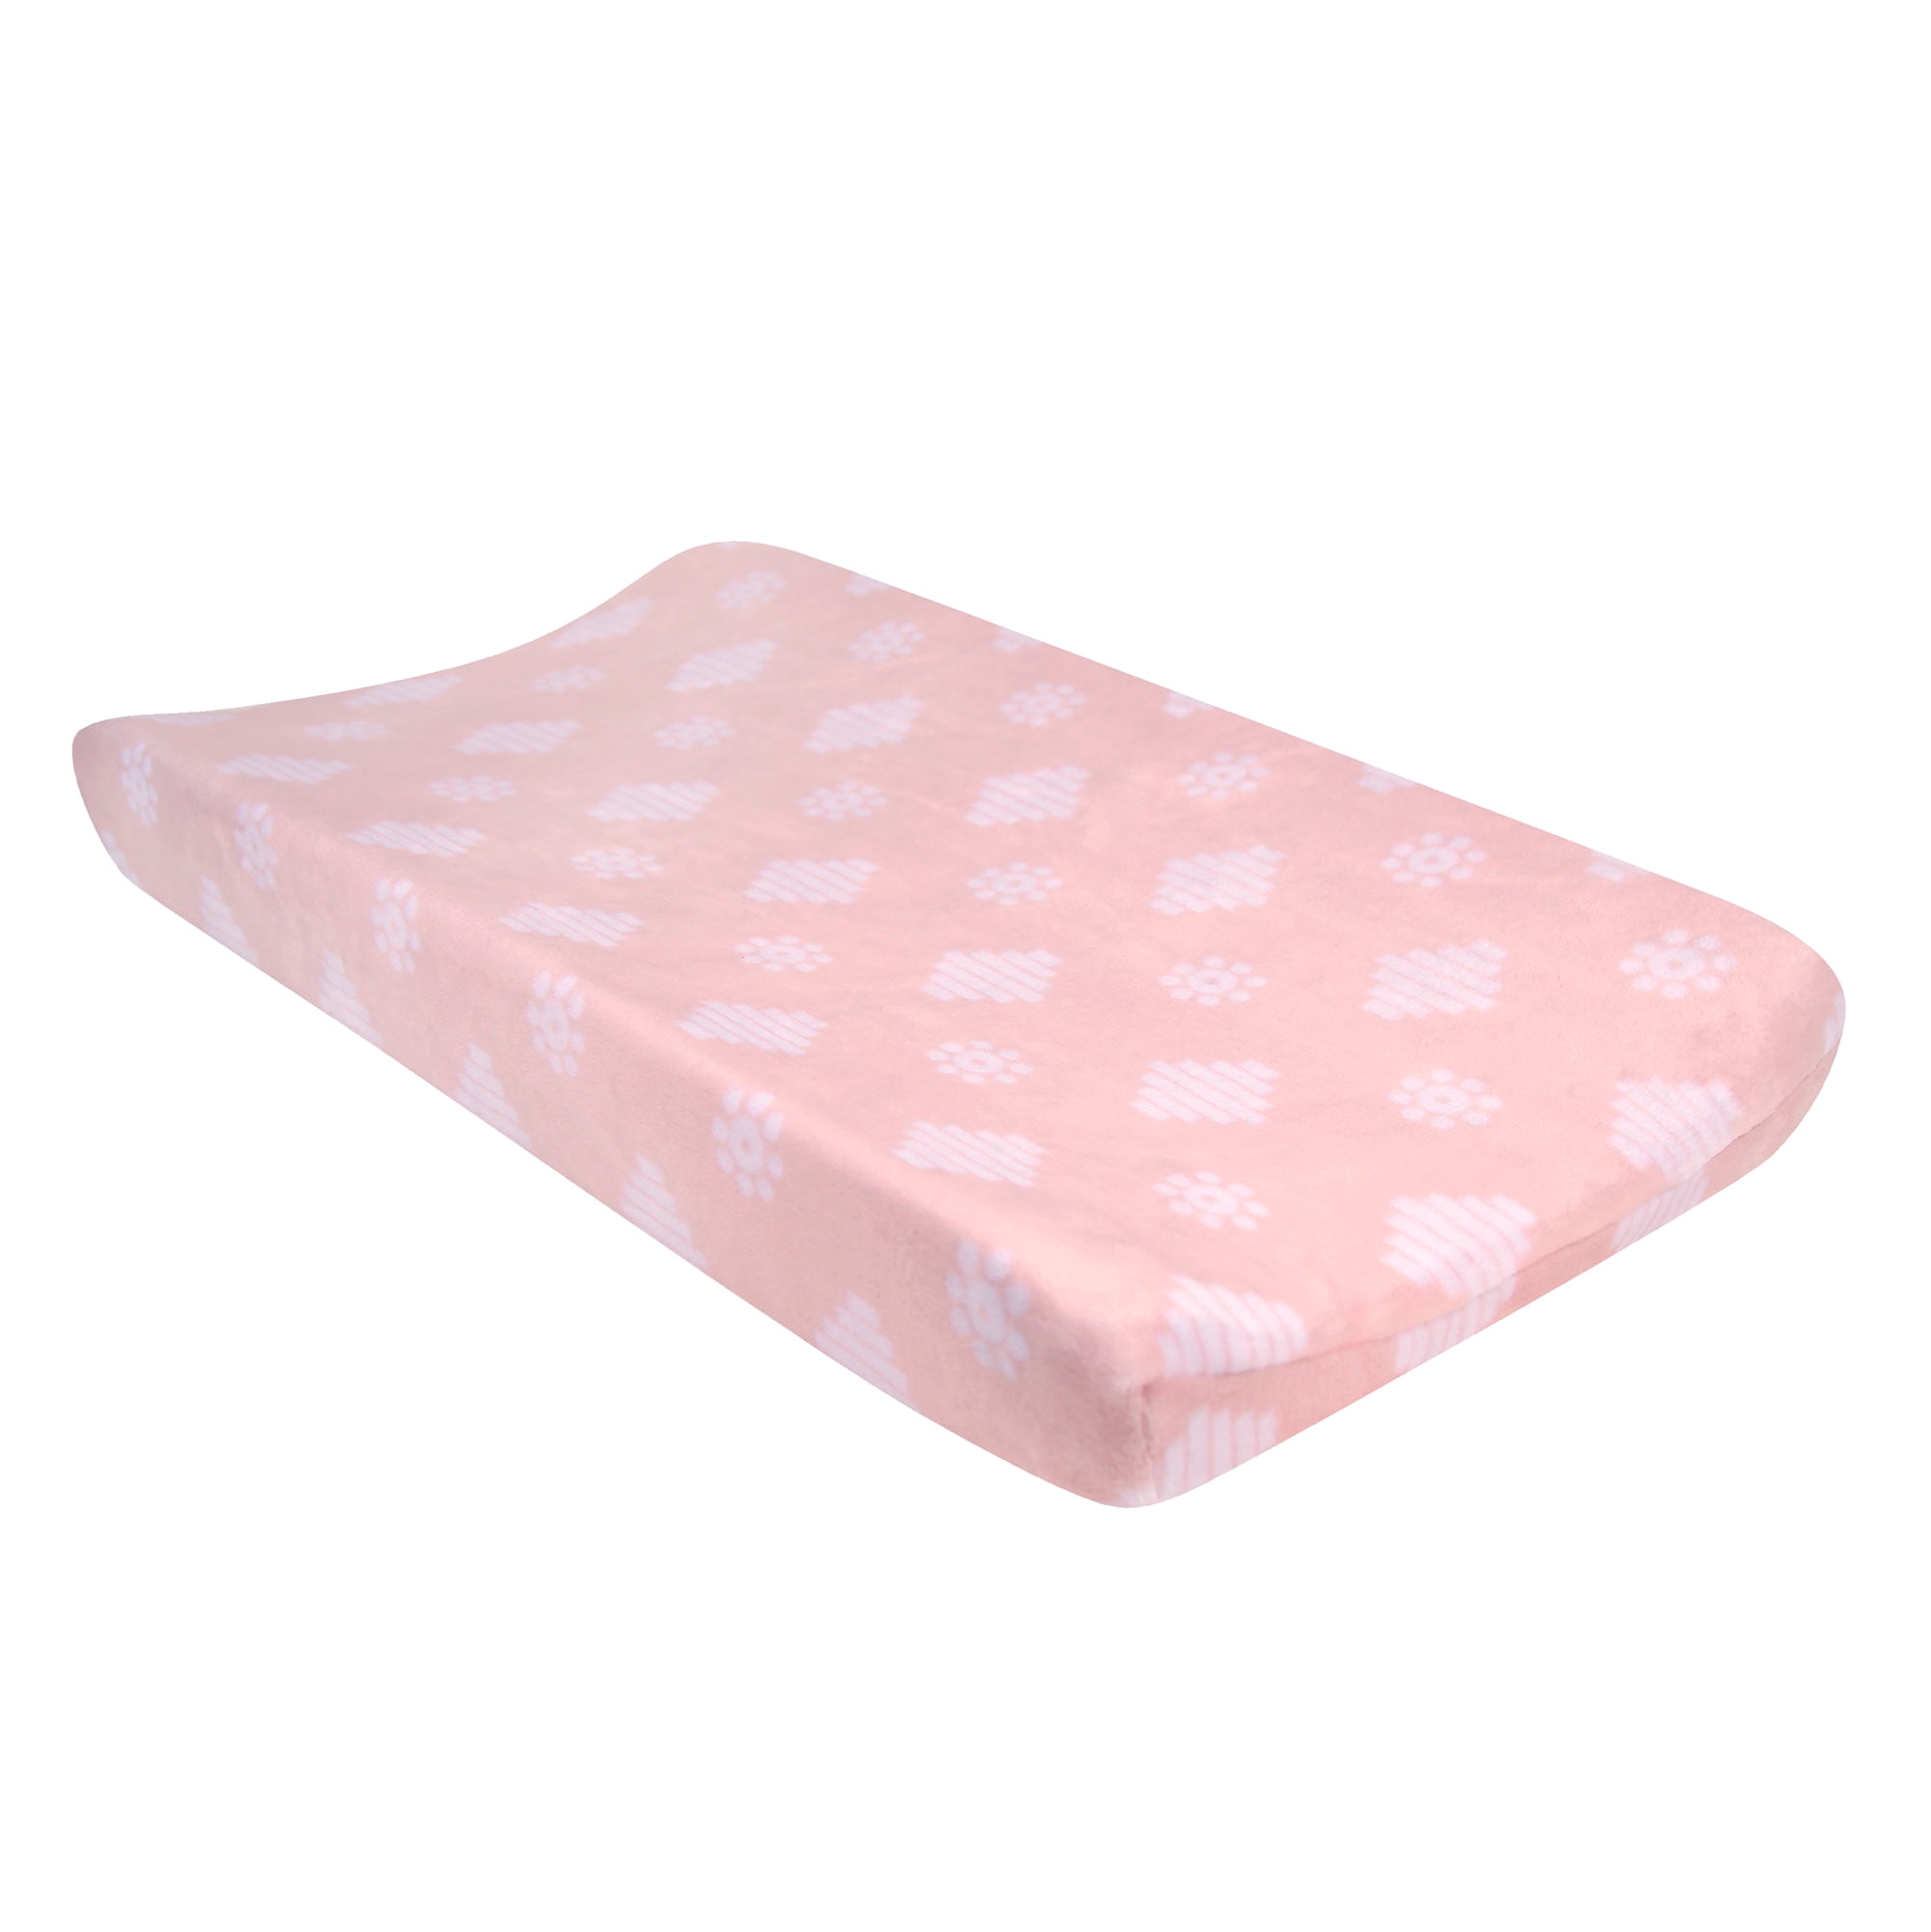 Lambs & Ivy Forever Friends Pink/White Changing Pad Cover